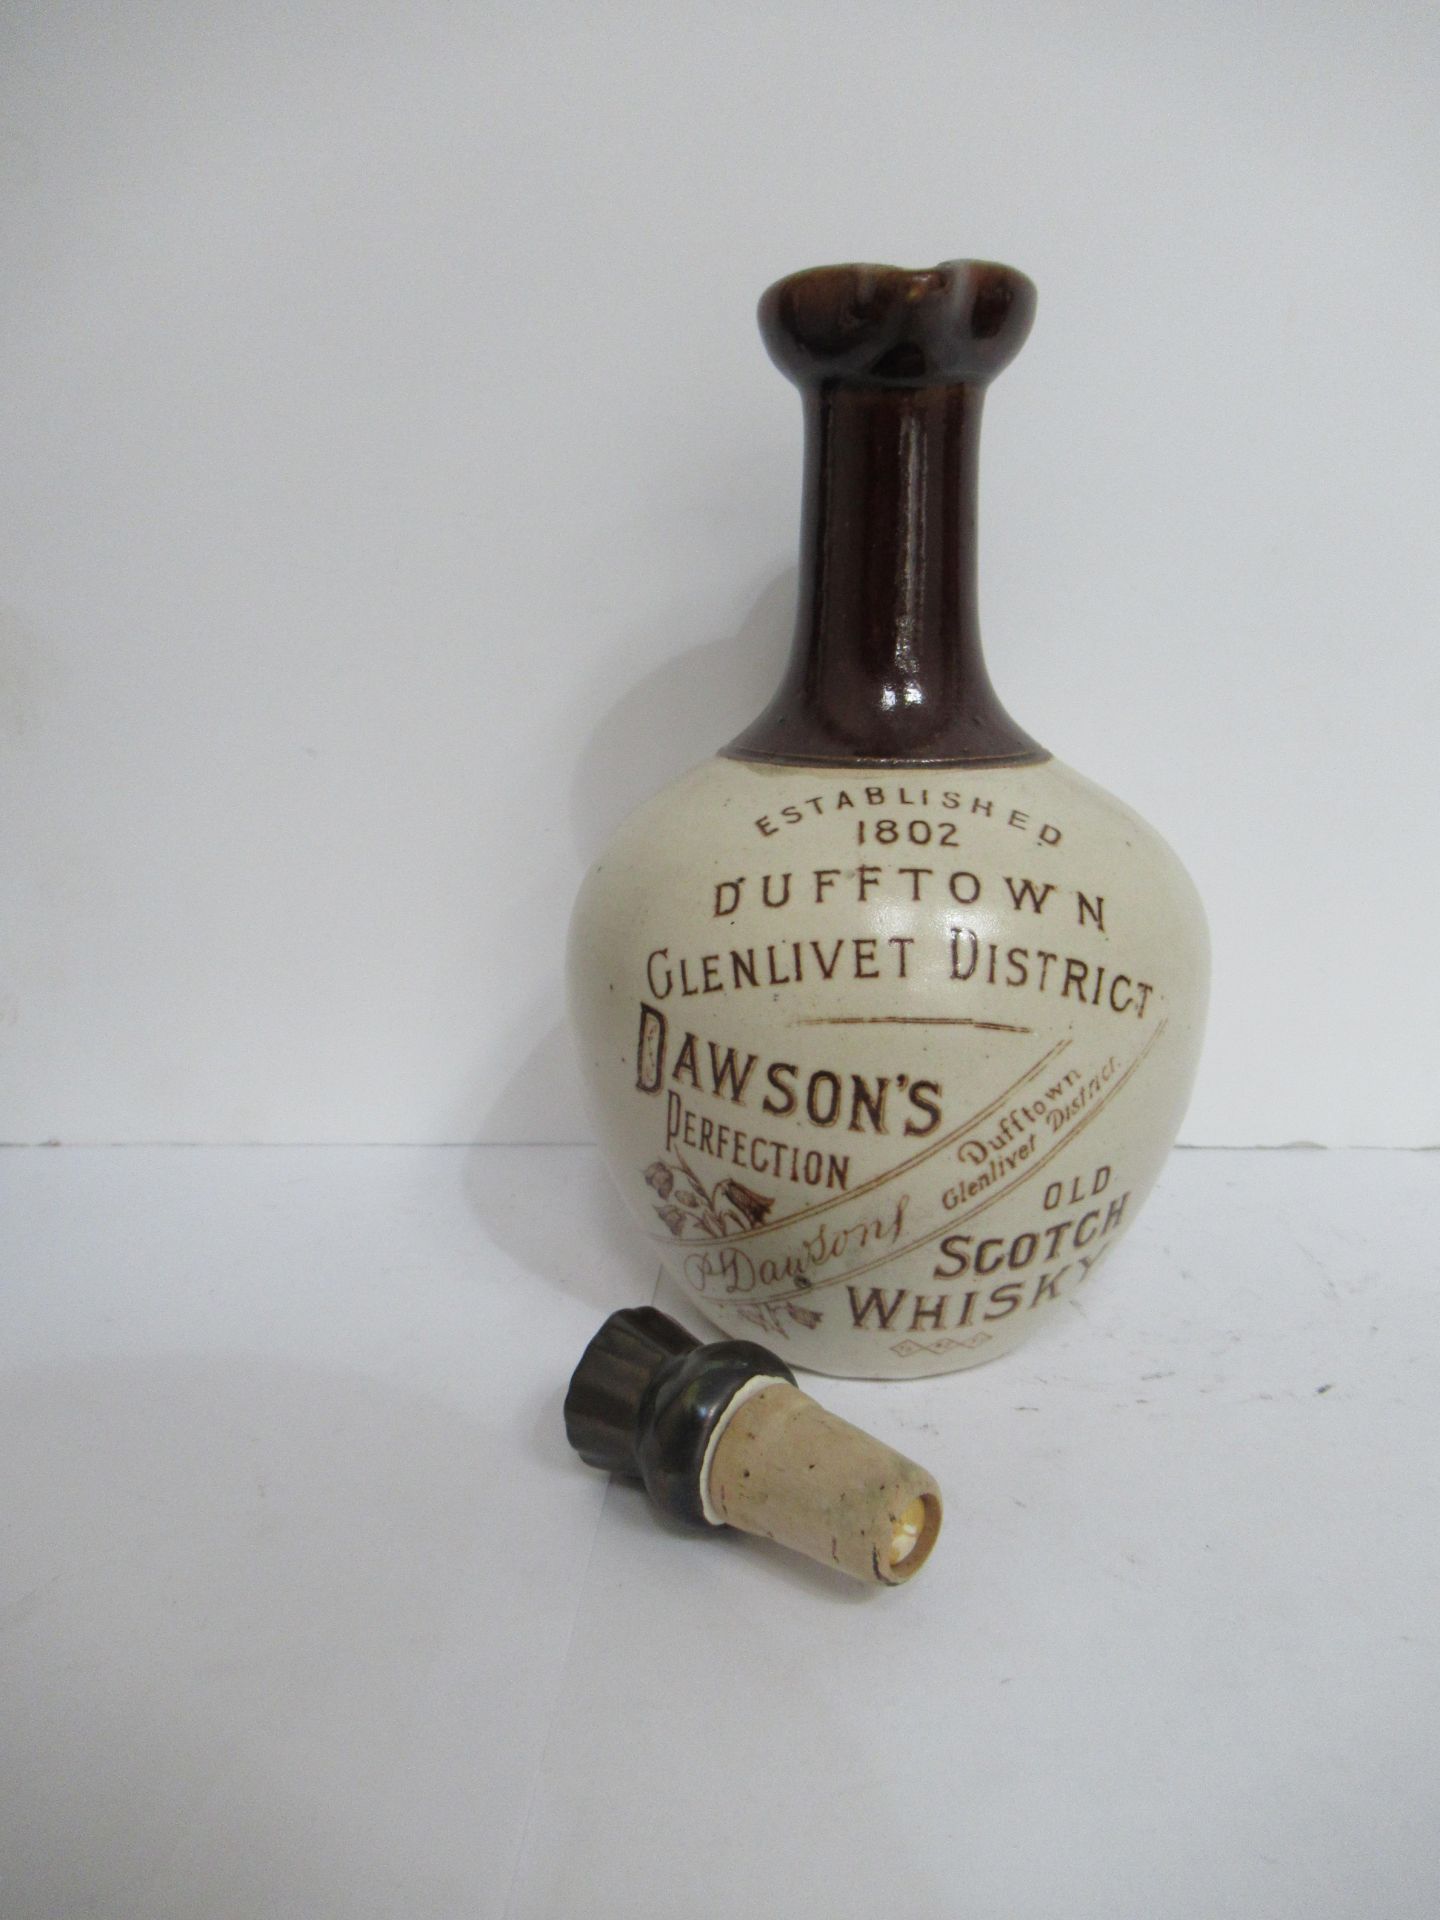 Dawson's Perfection old scotch whisky Dufftown Glenlivet distract jug with stopper - Image 5 of 8